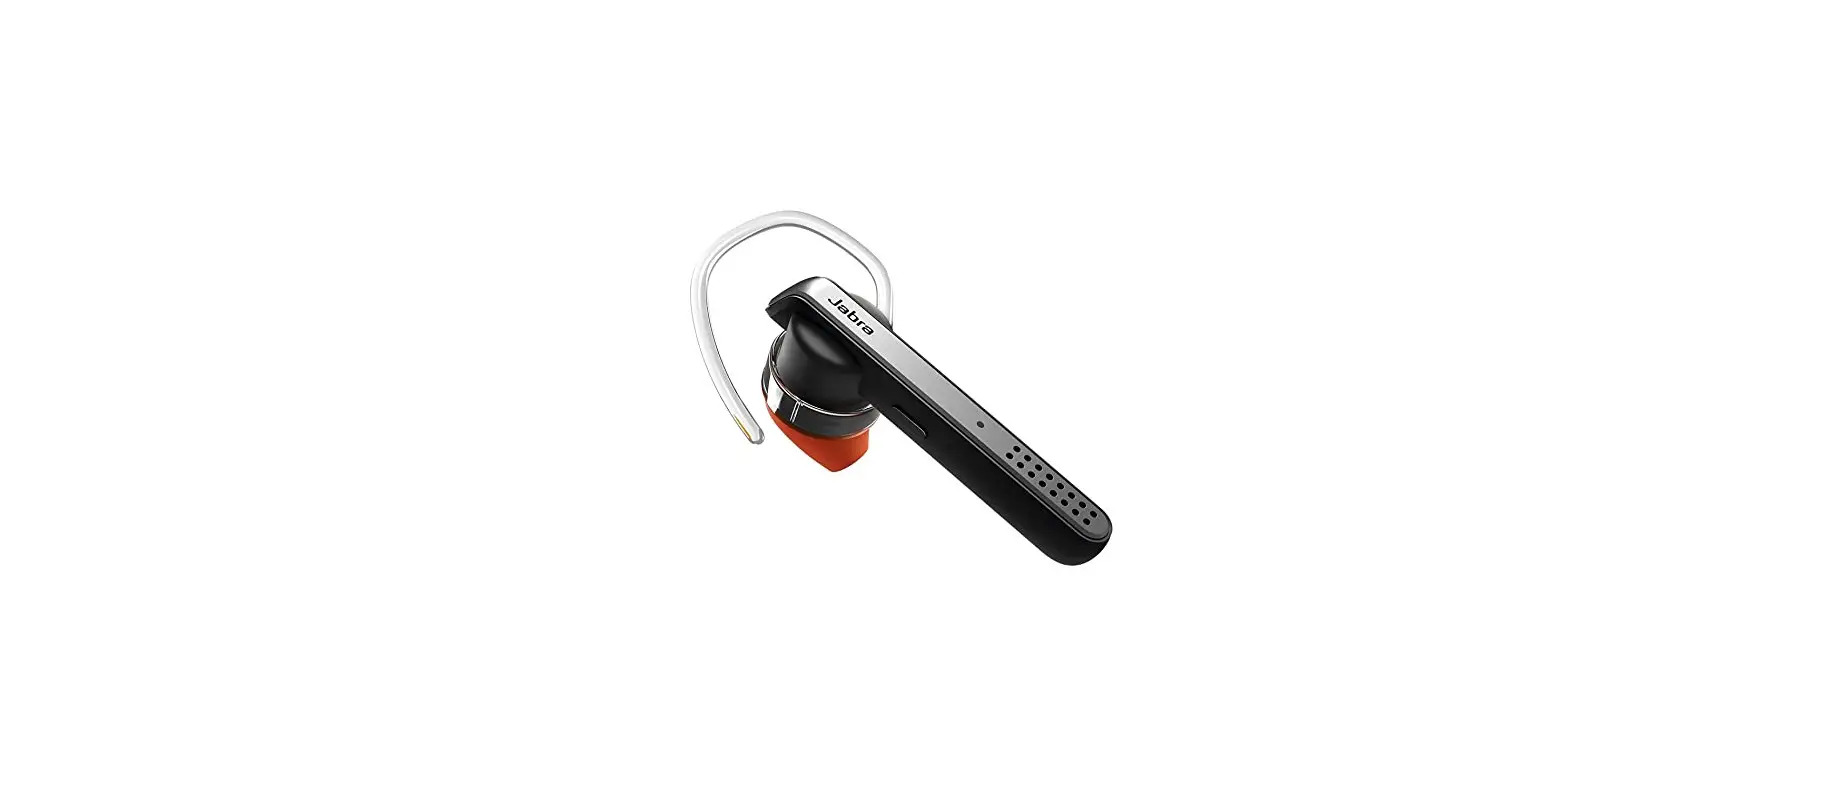 Can I Connect my Jabra Bluetooth Device